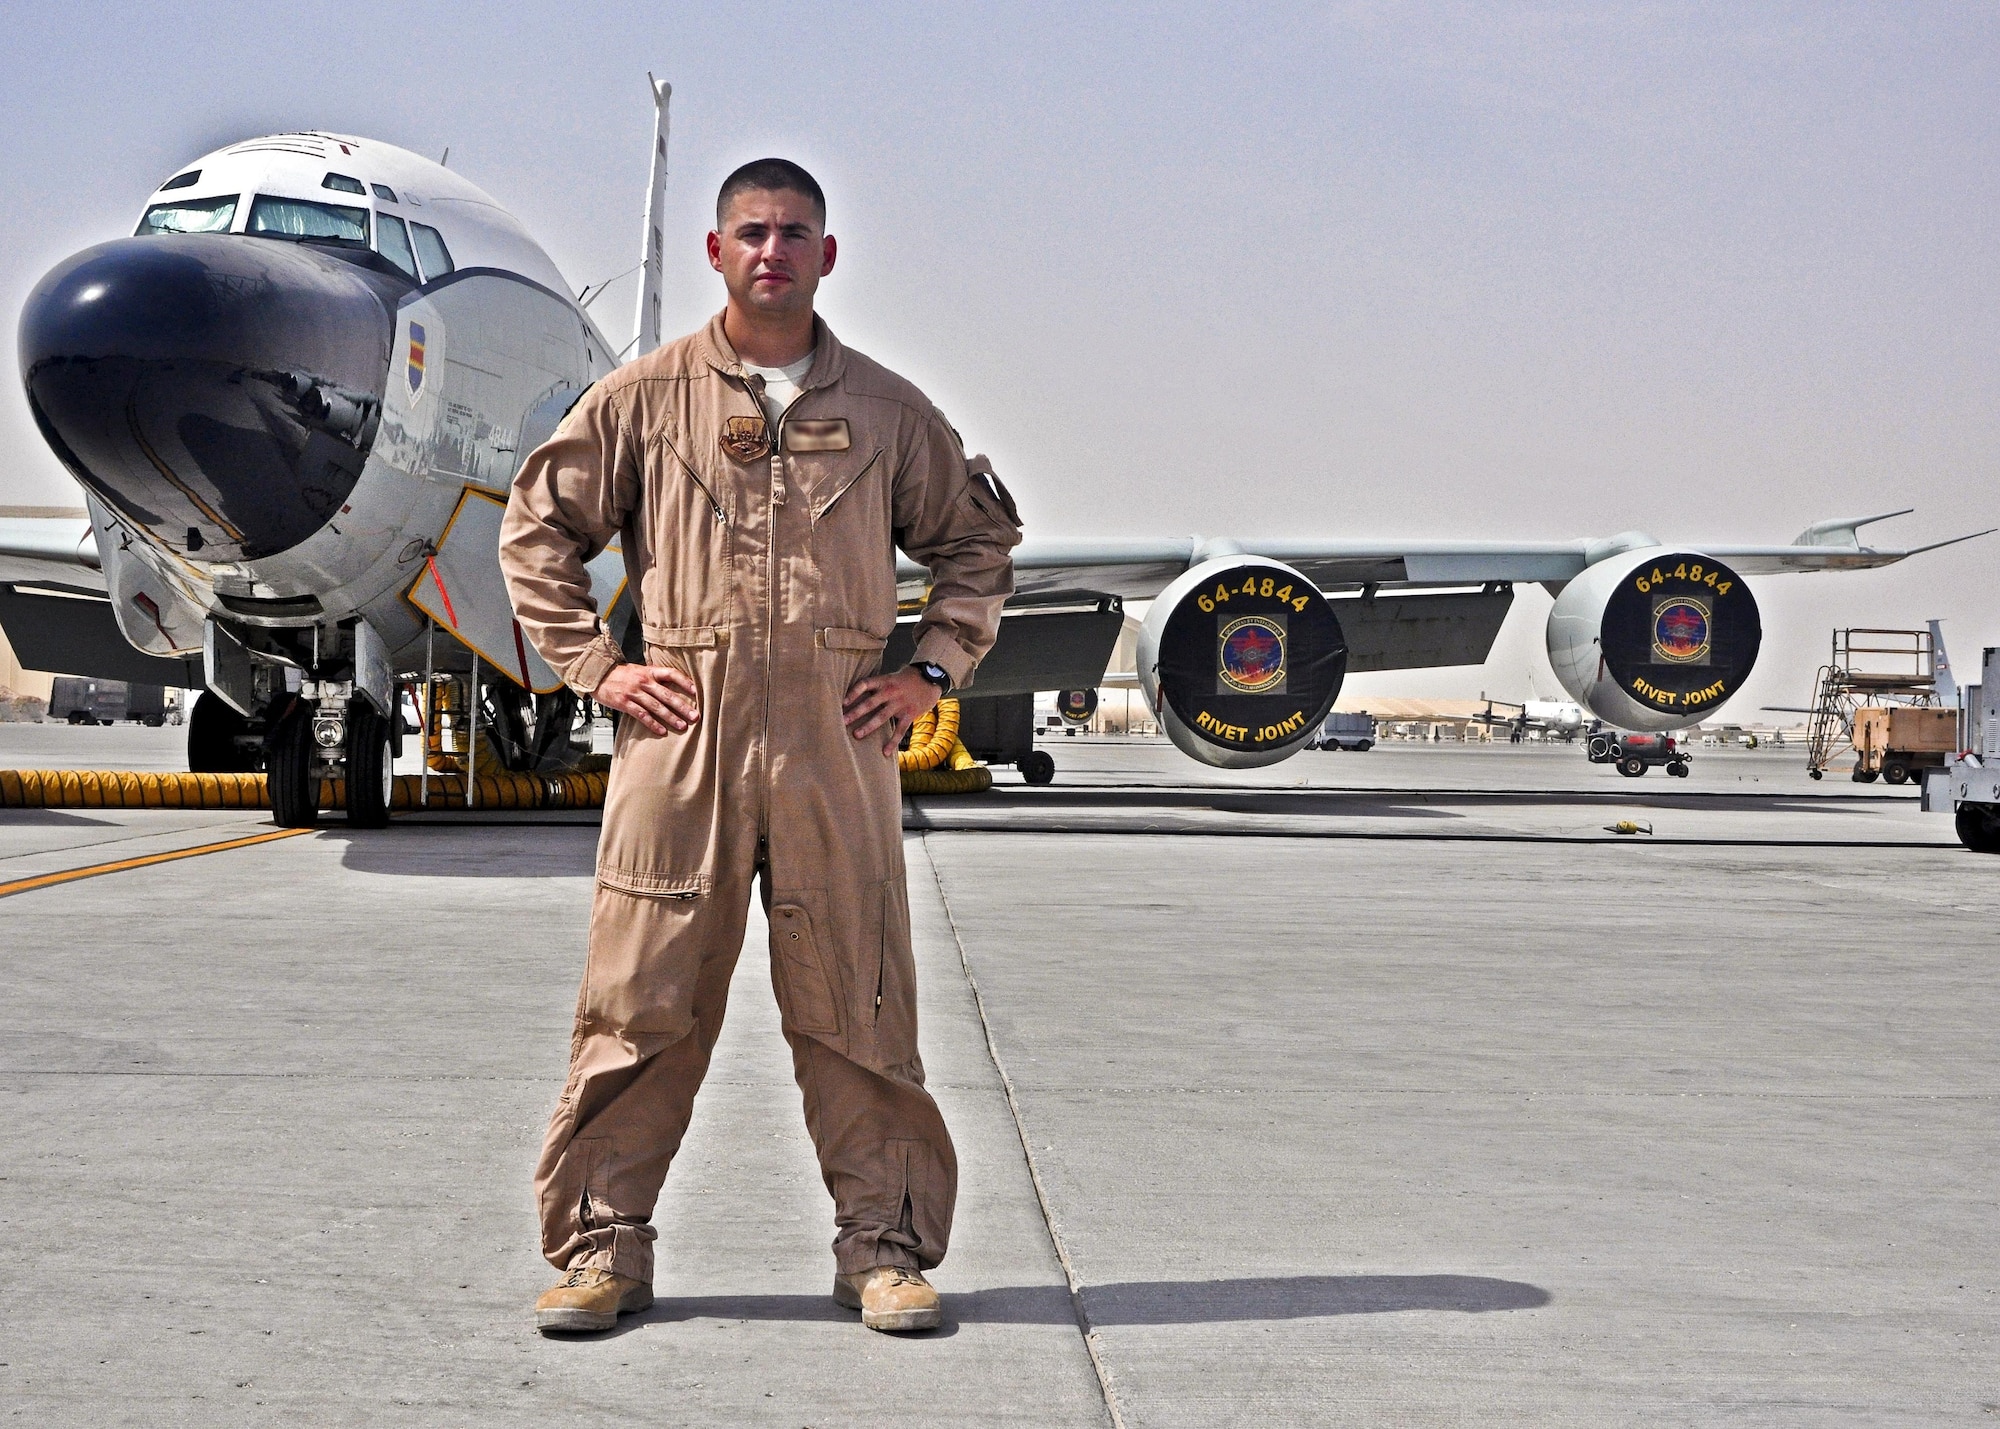 Staff Sgt. Chris poses in front of the RC-135 Rivet Joint July 16, 2013, at the 379th Air Expeditionary Wing in Southwest Asia. Chris is a career enlisted aviator who has flown more than 2,000 hours and more than 400 combat sorties. 